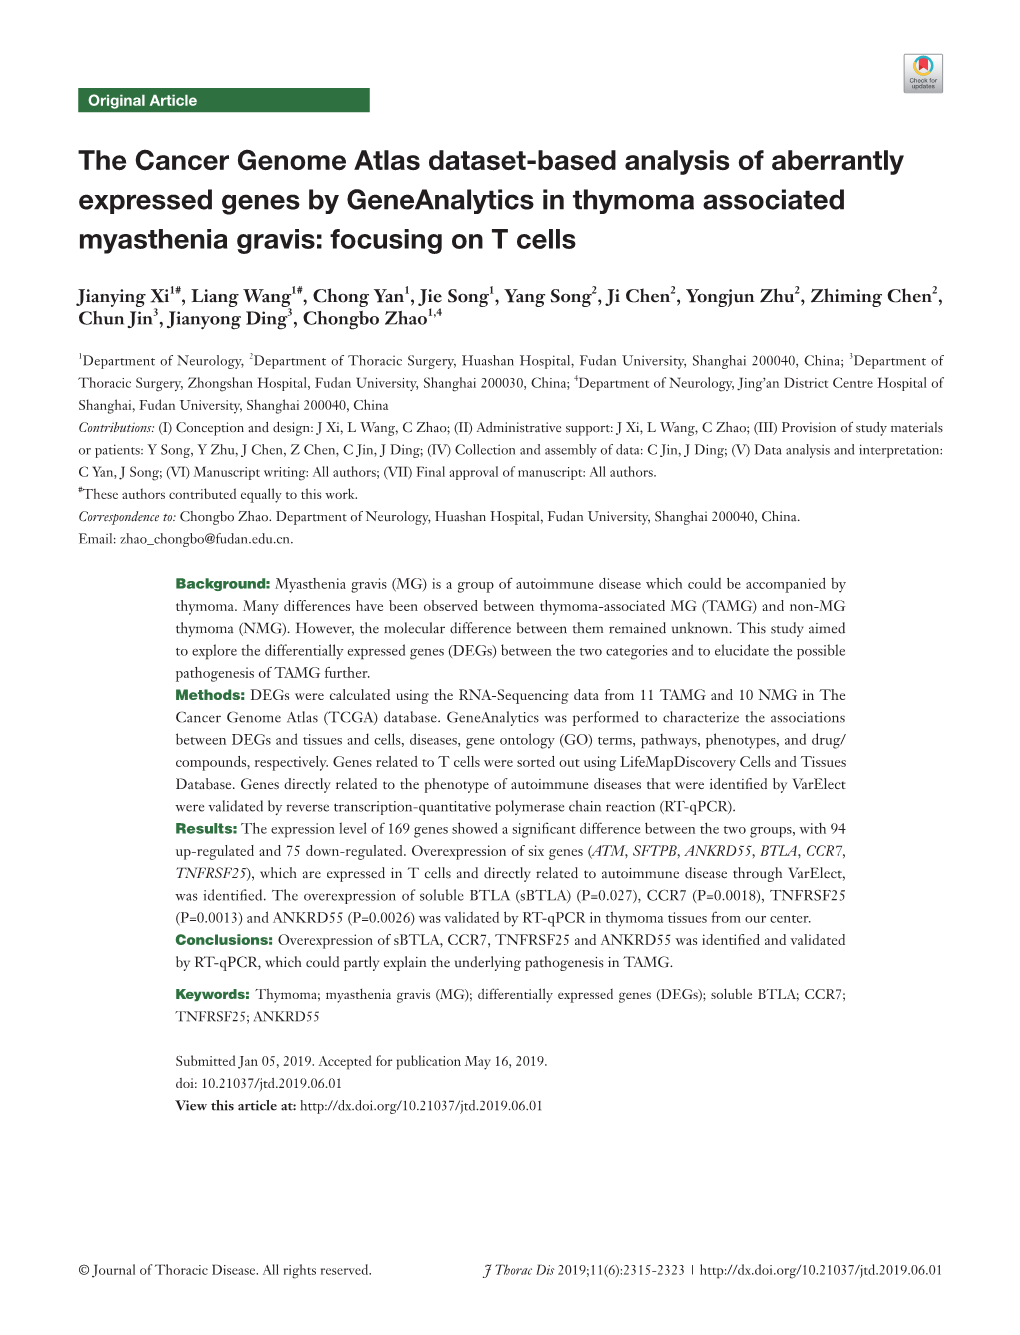 The Cancer Genome Atlas Dataset-Based Analysis of Aberrantly Expressed Genes by Geneanalytics in Thymoma Associated Myasthenia Gravis: Focusing on T Cells